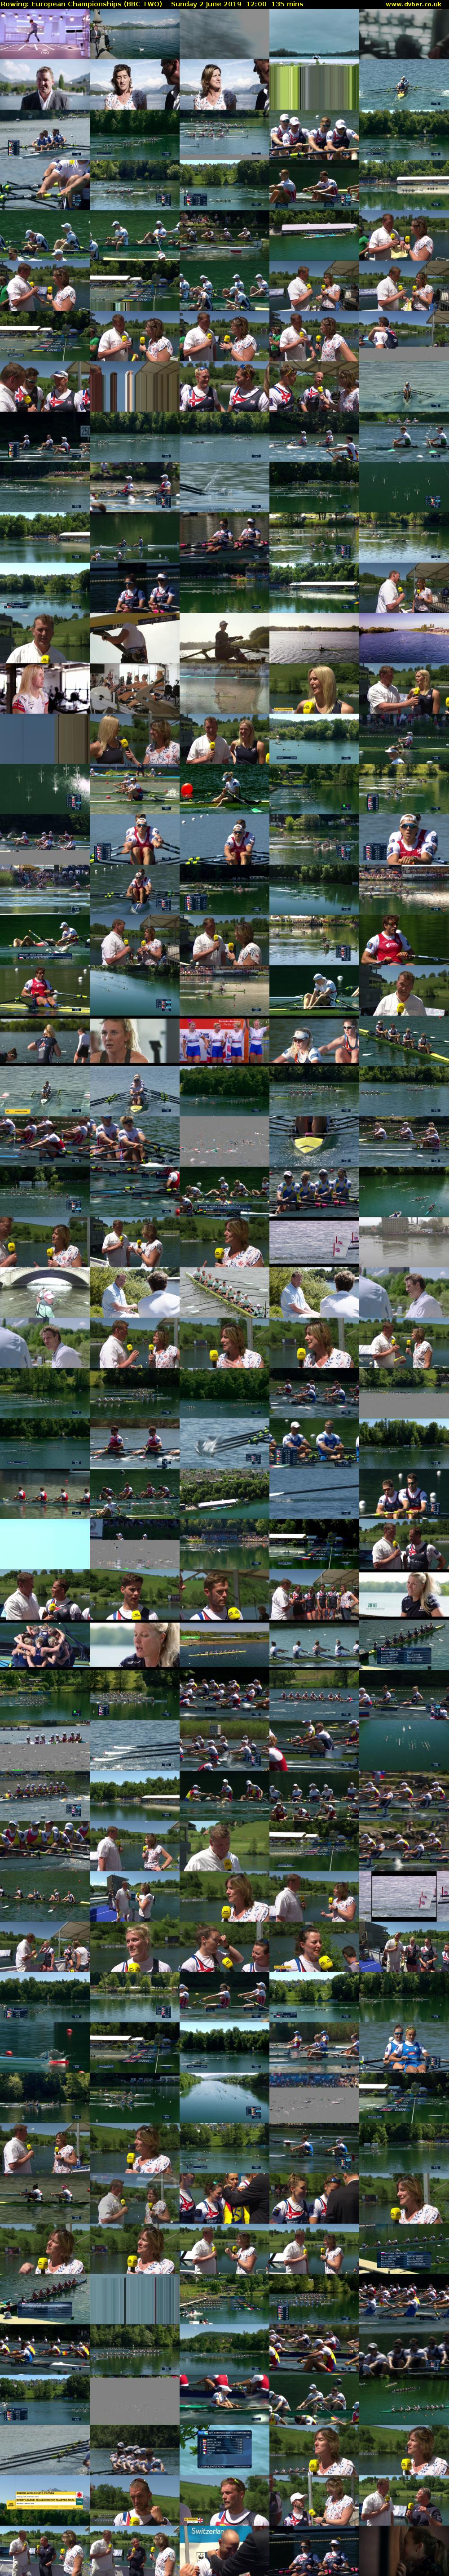 Rowing: European Championships (BBC TWO) Sunday 2 June 2019 12:00 - 14:15